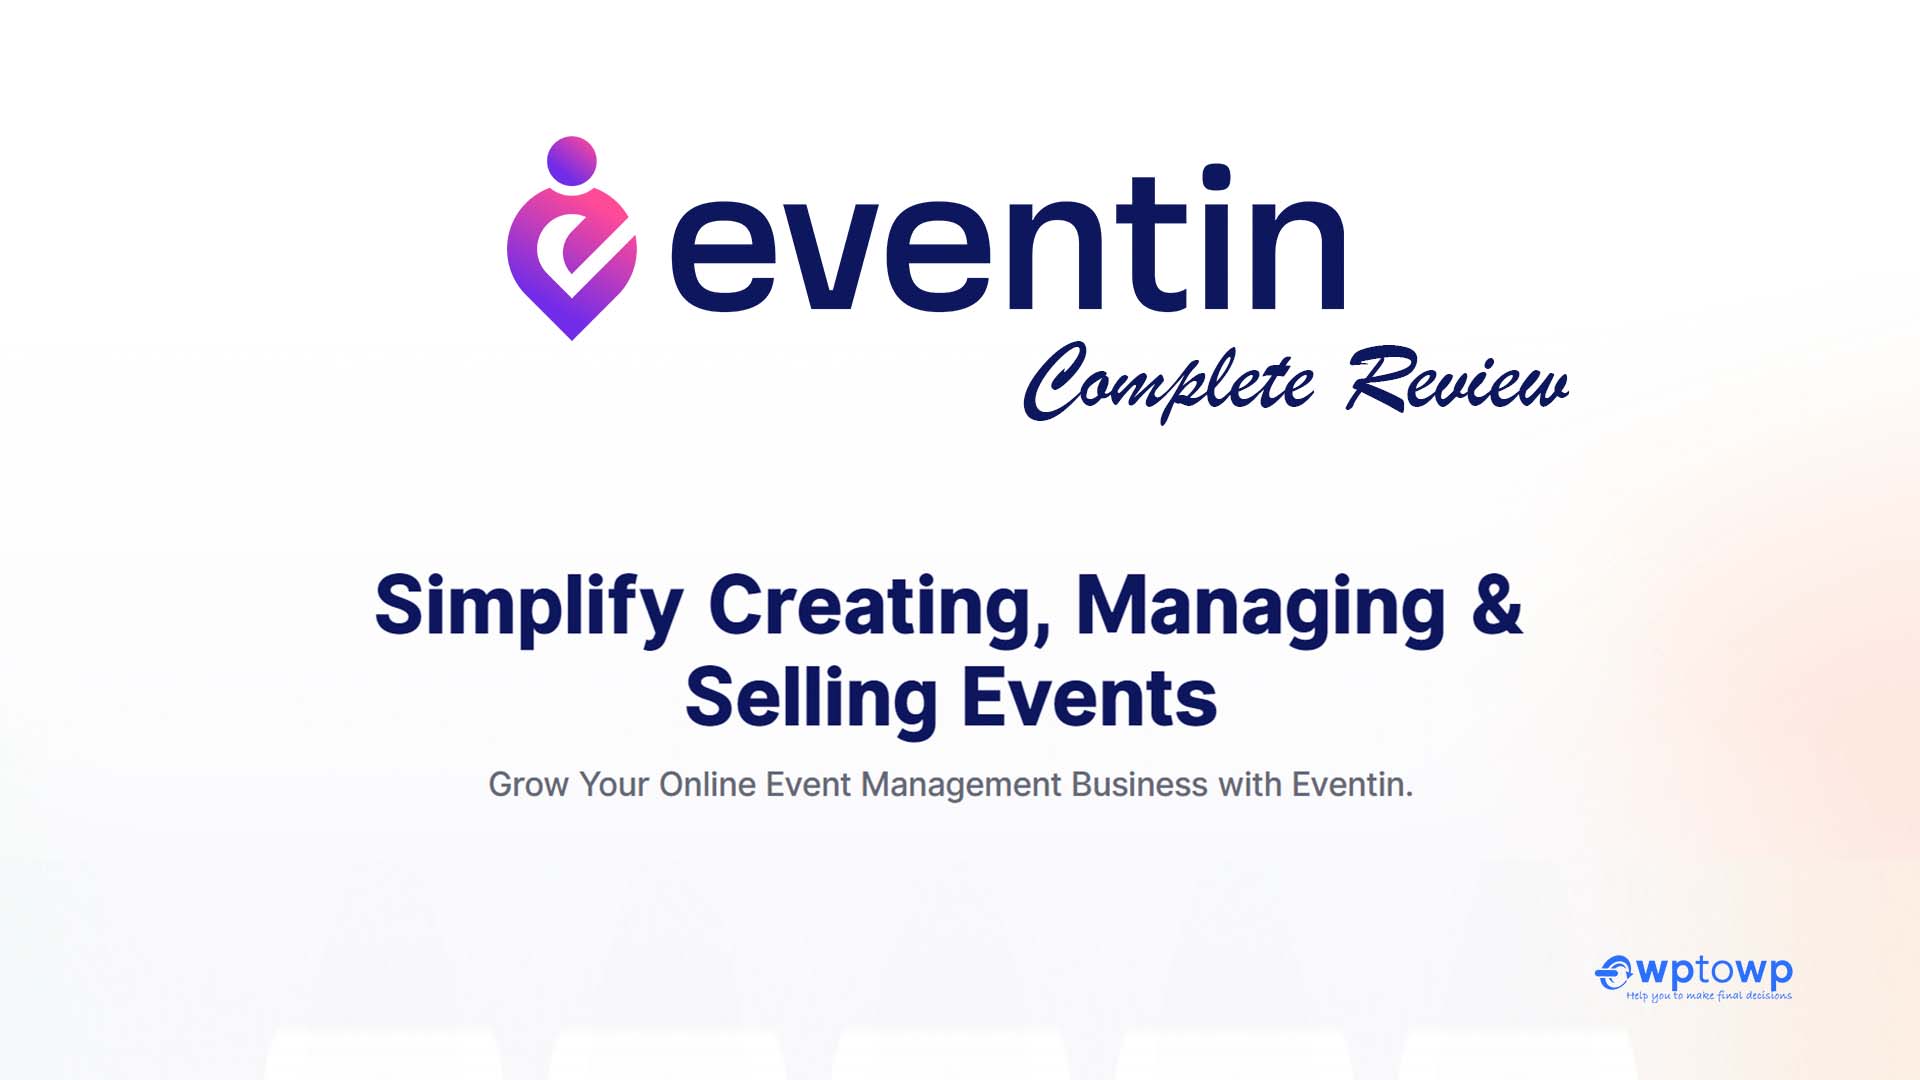 Eventin Plugin, Full Eventin Review, Wptowp.png